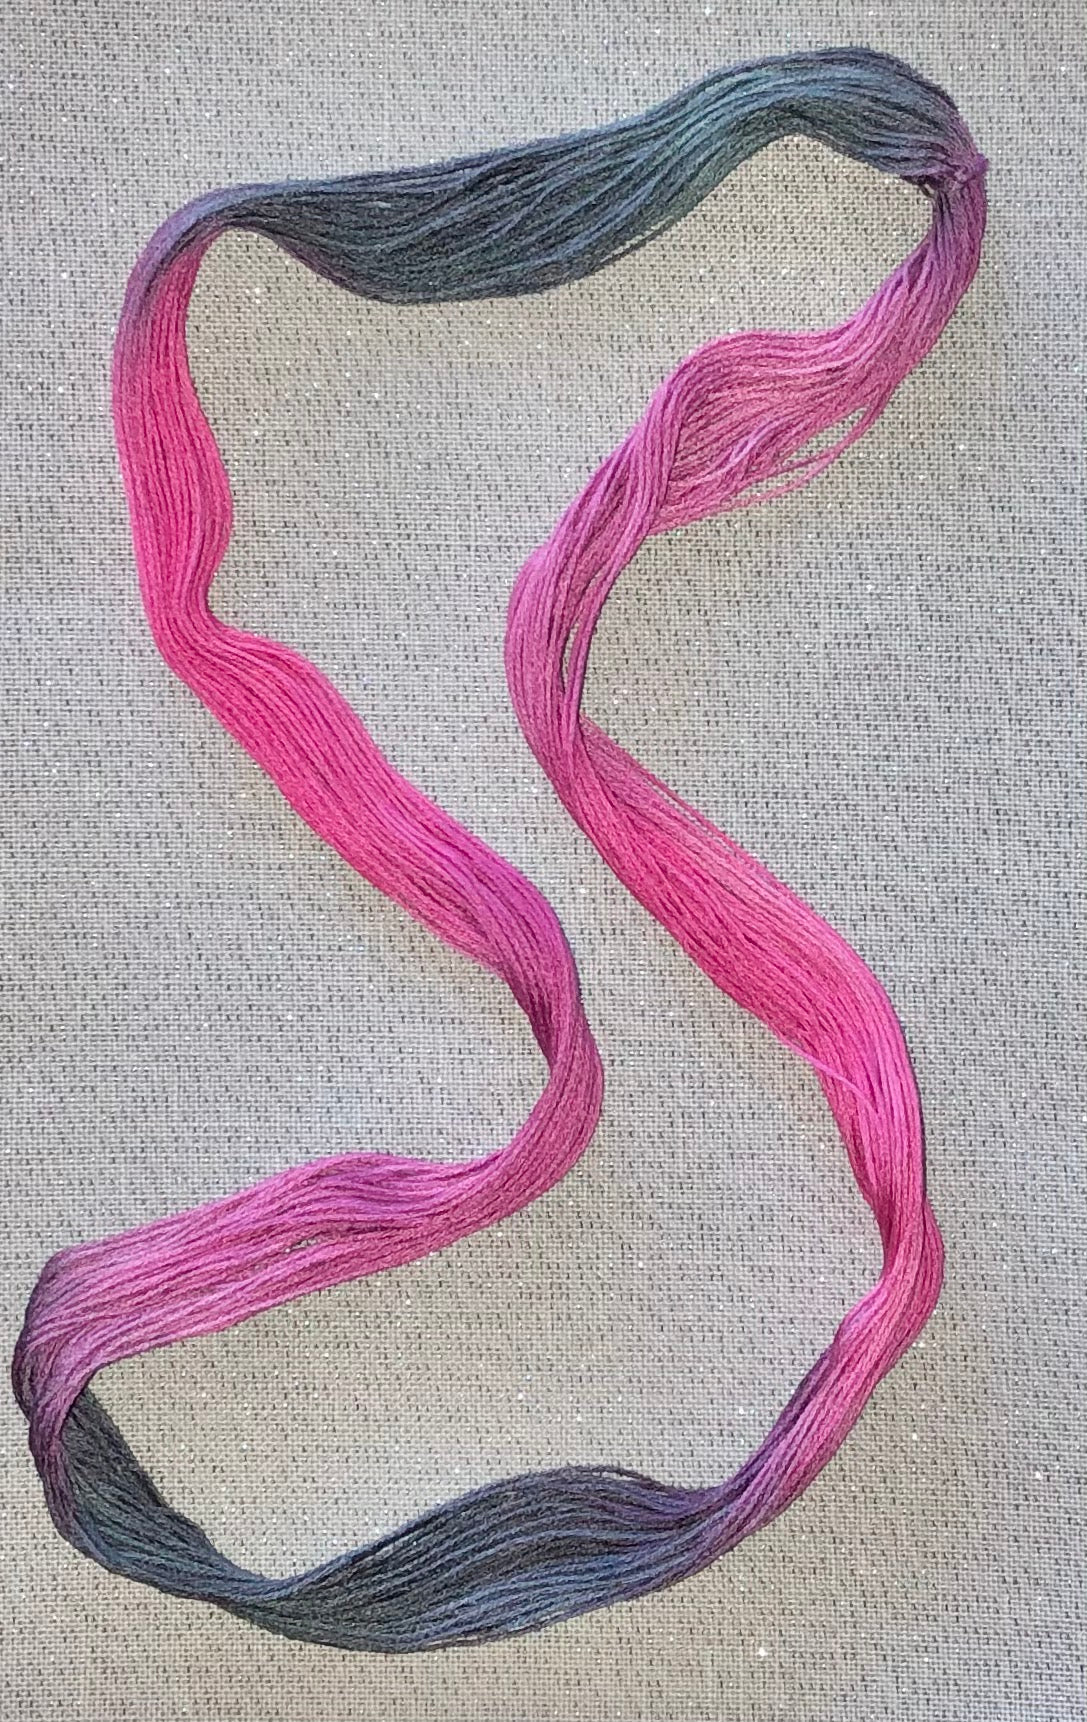 Silk hand dyed floss - Pink Zebras - Dyeing for Cross Stitch